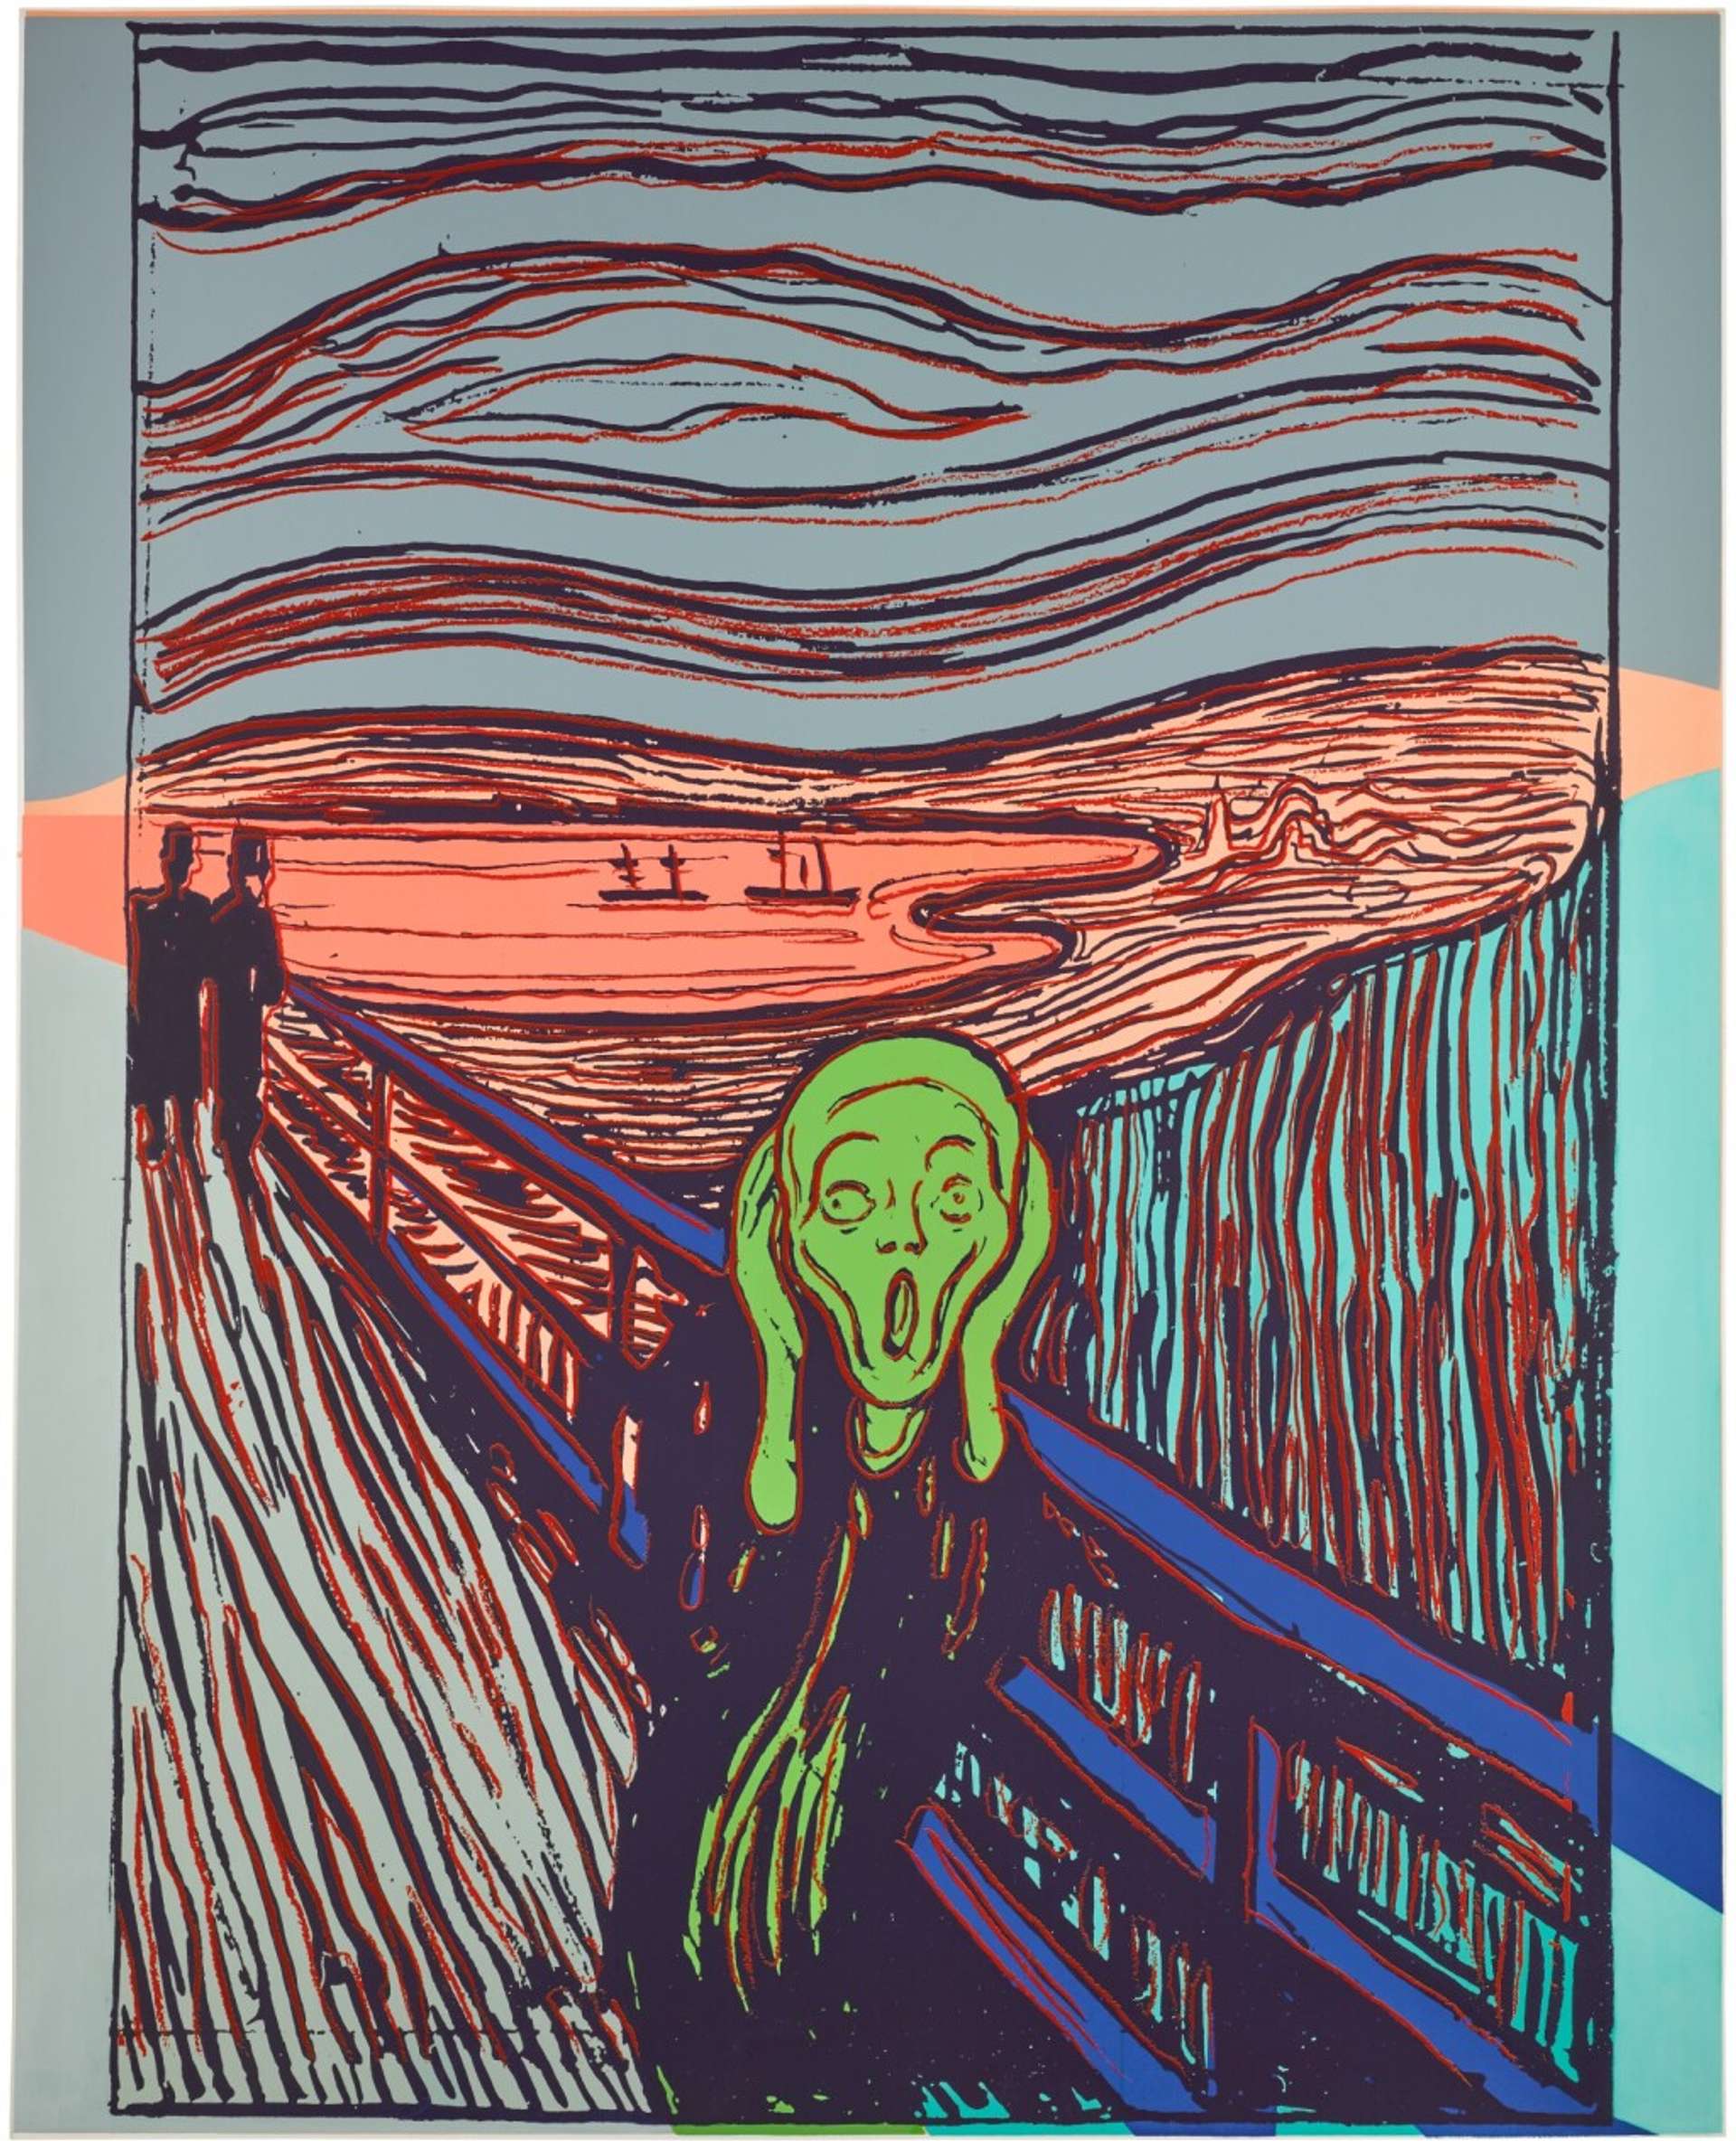 The Scream - Unsigned Print by Andy Warhol 1984 - MyArtBroker